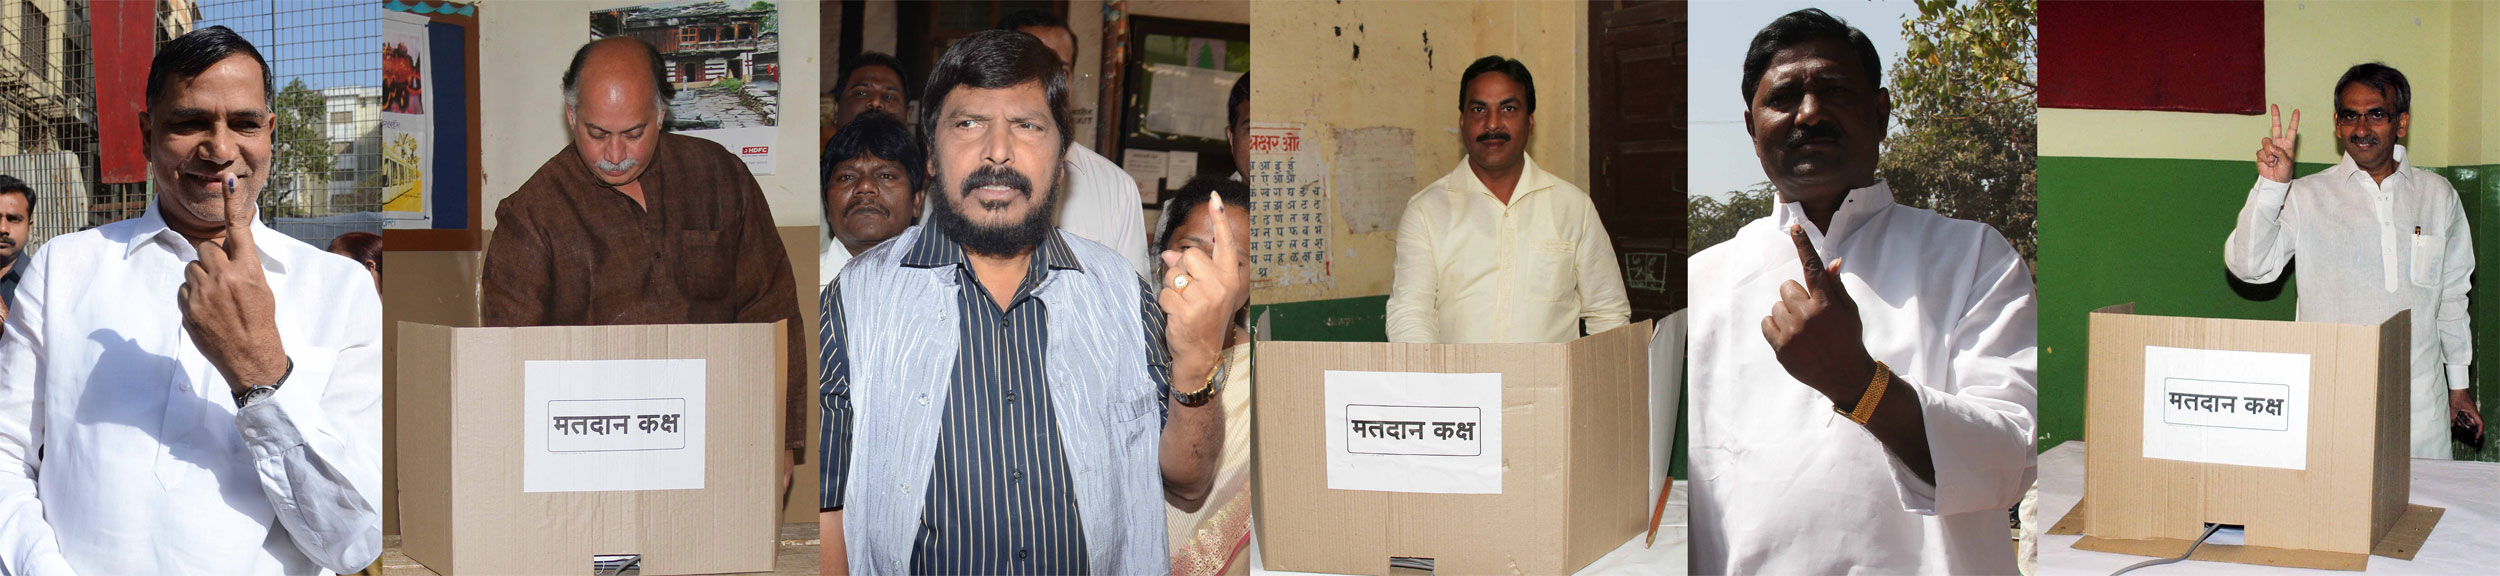 RESPECTED LEADERS CASTED THEIR VOTE IN MUMBAI.